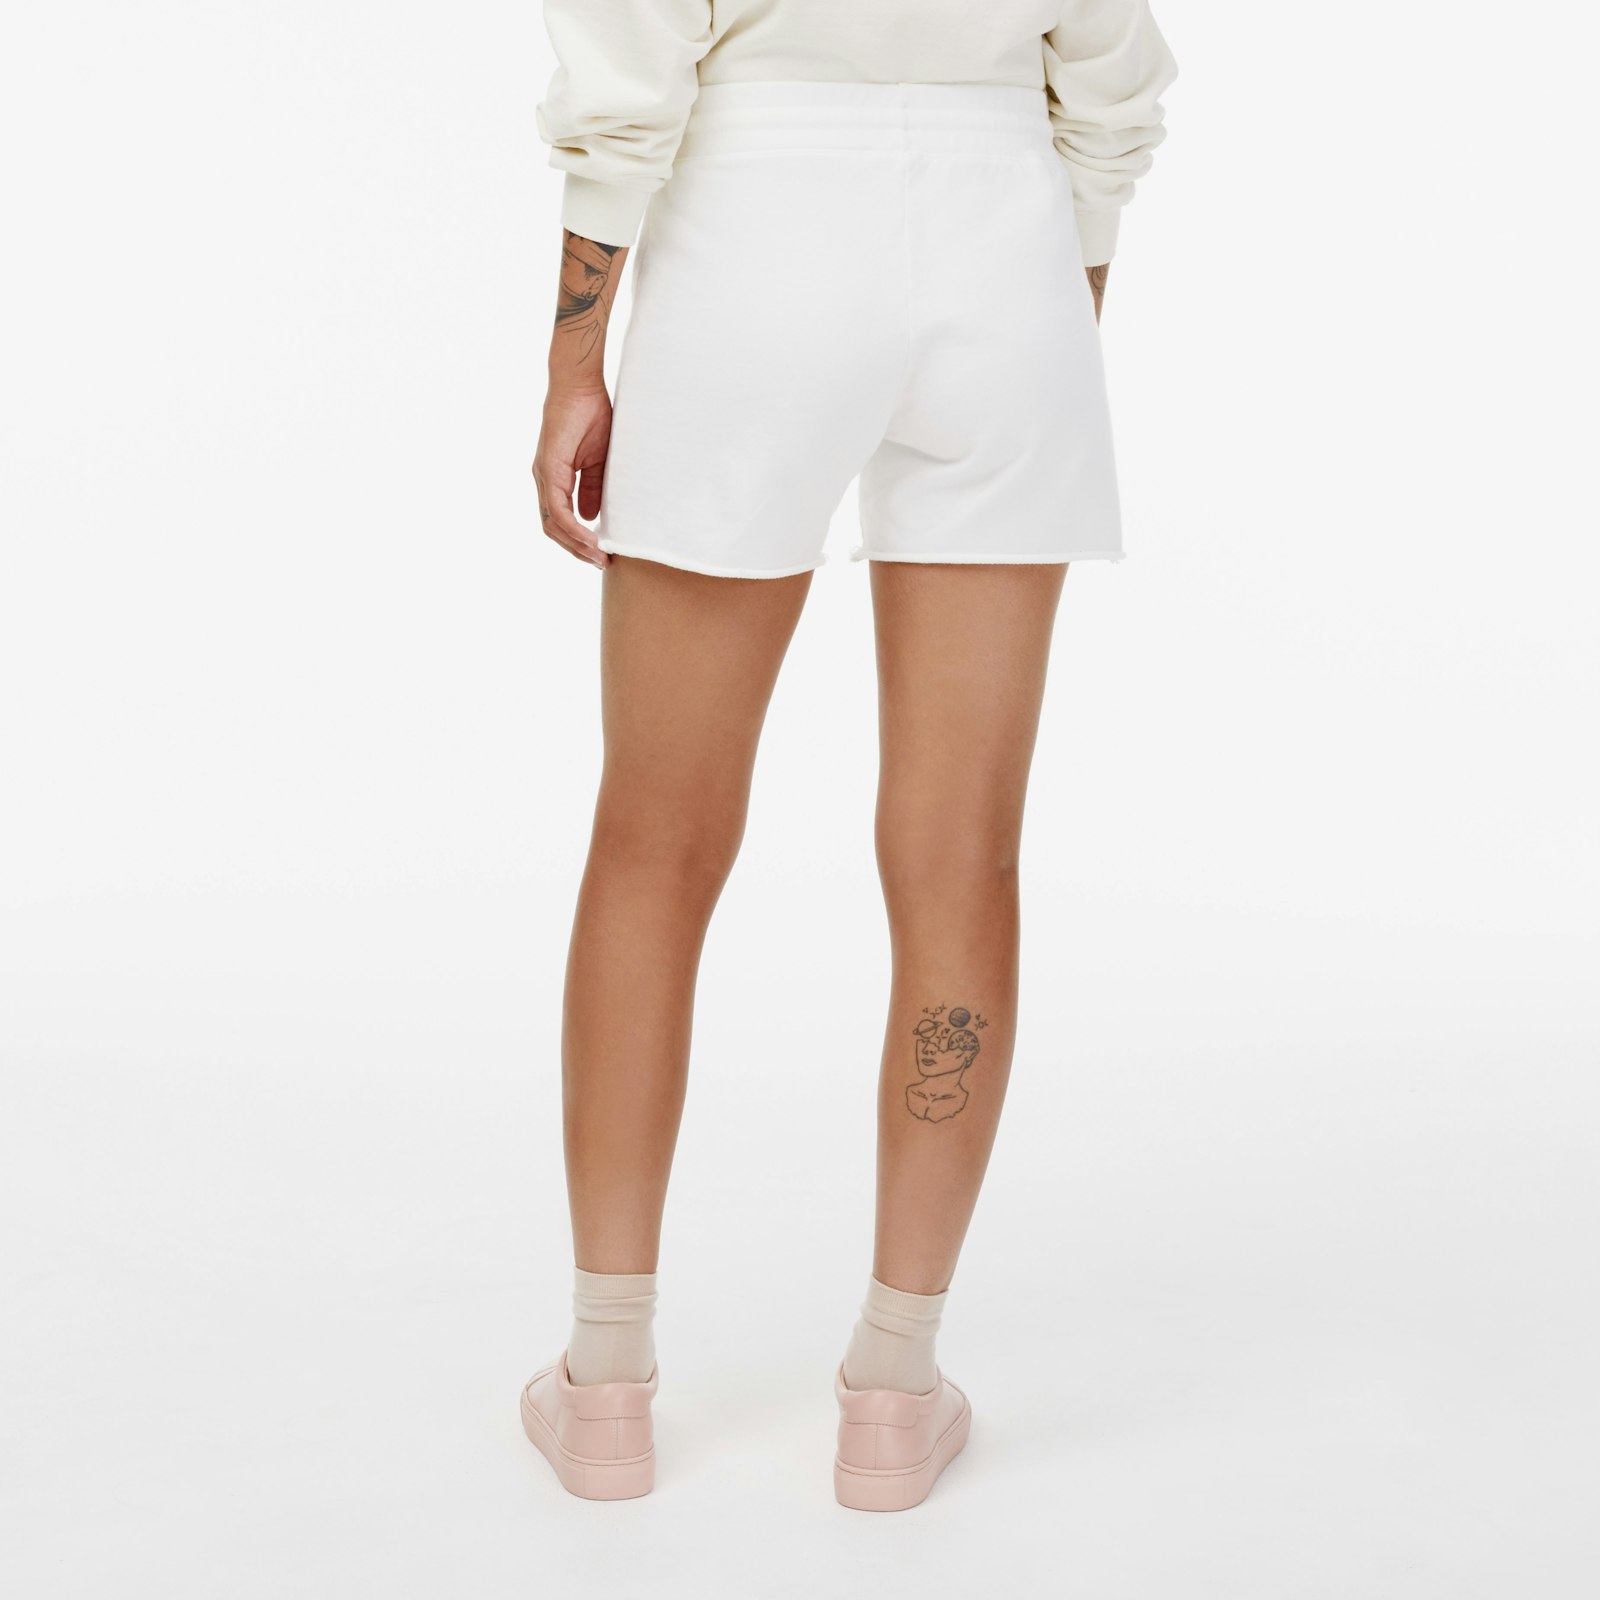 RecycledTerryShorts_OffWhite_Womens_OnFigure_1x1_0918.jpg